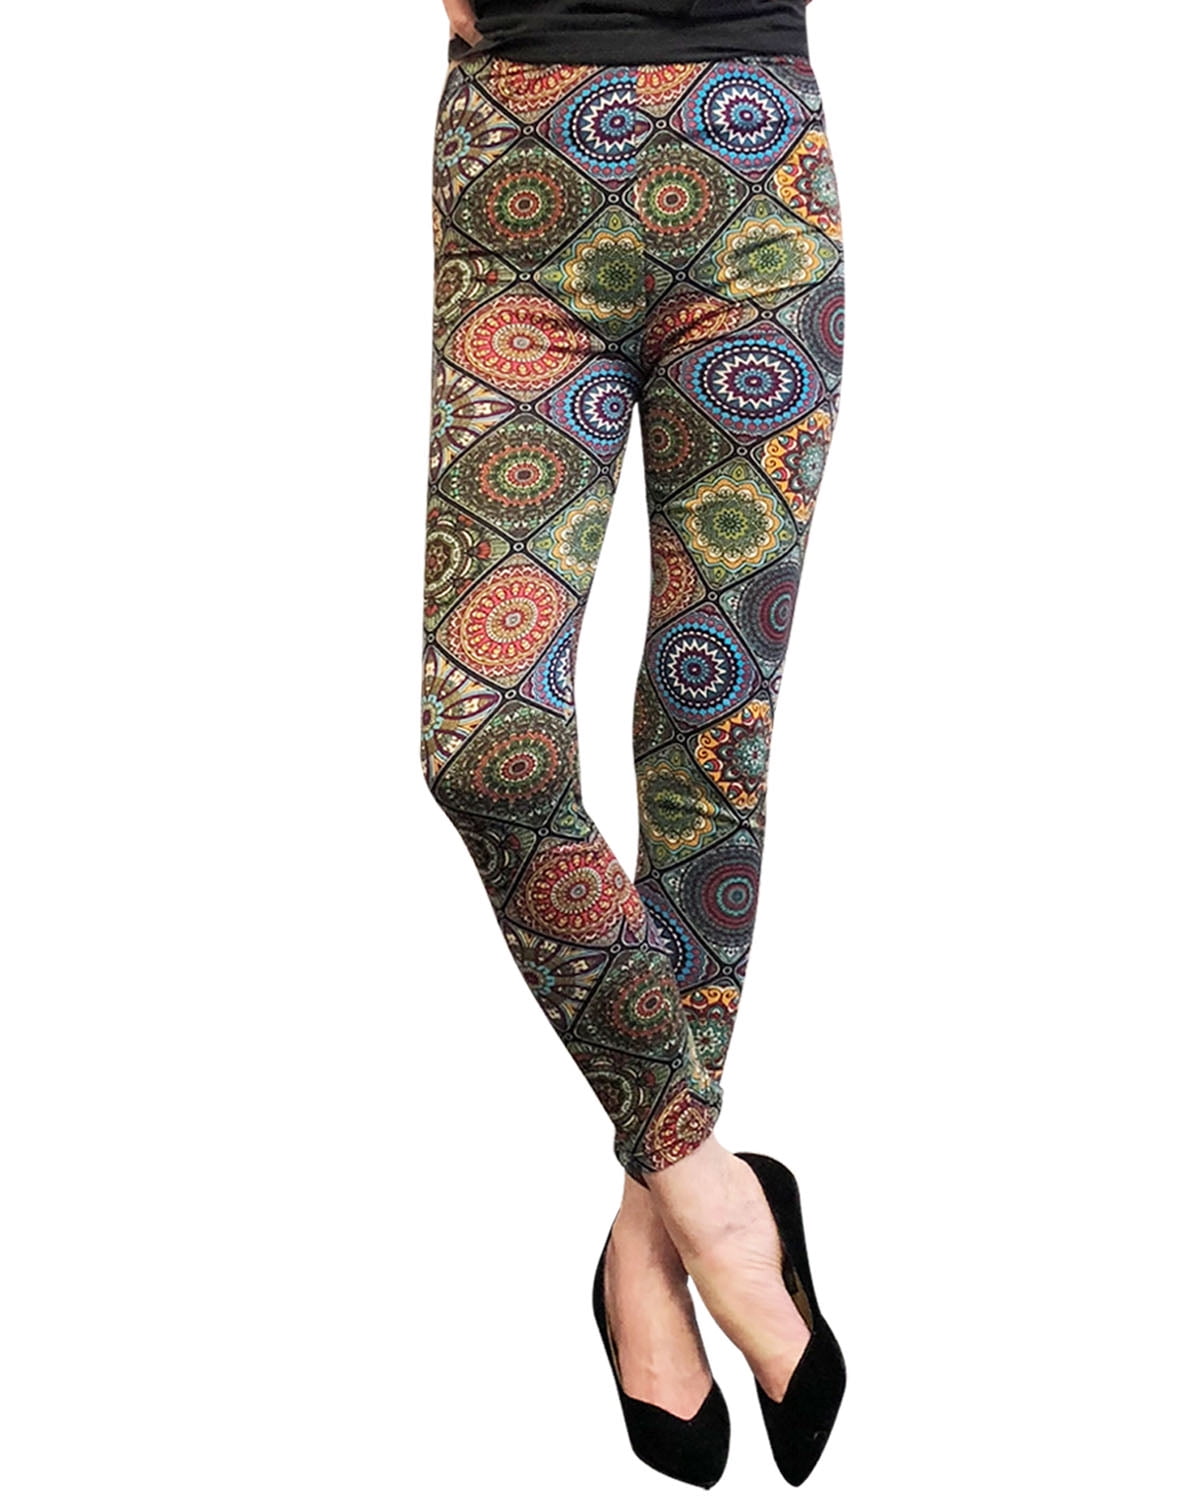 Wrapables Women's Ultra-Soft and Stretchy Printed Leggings for Activew